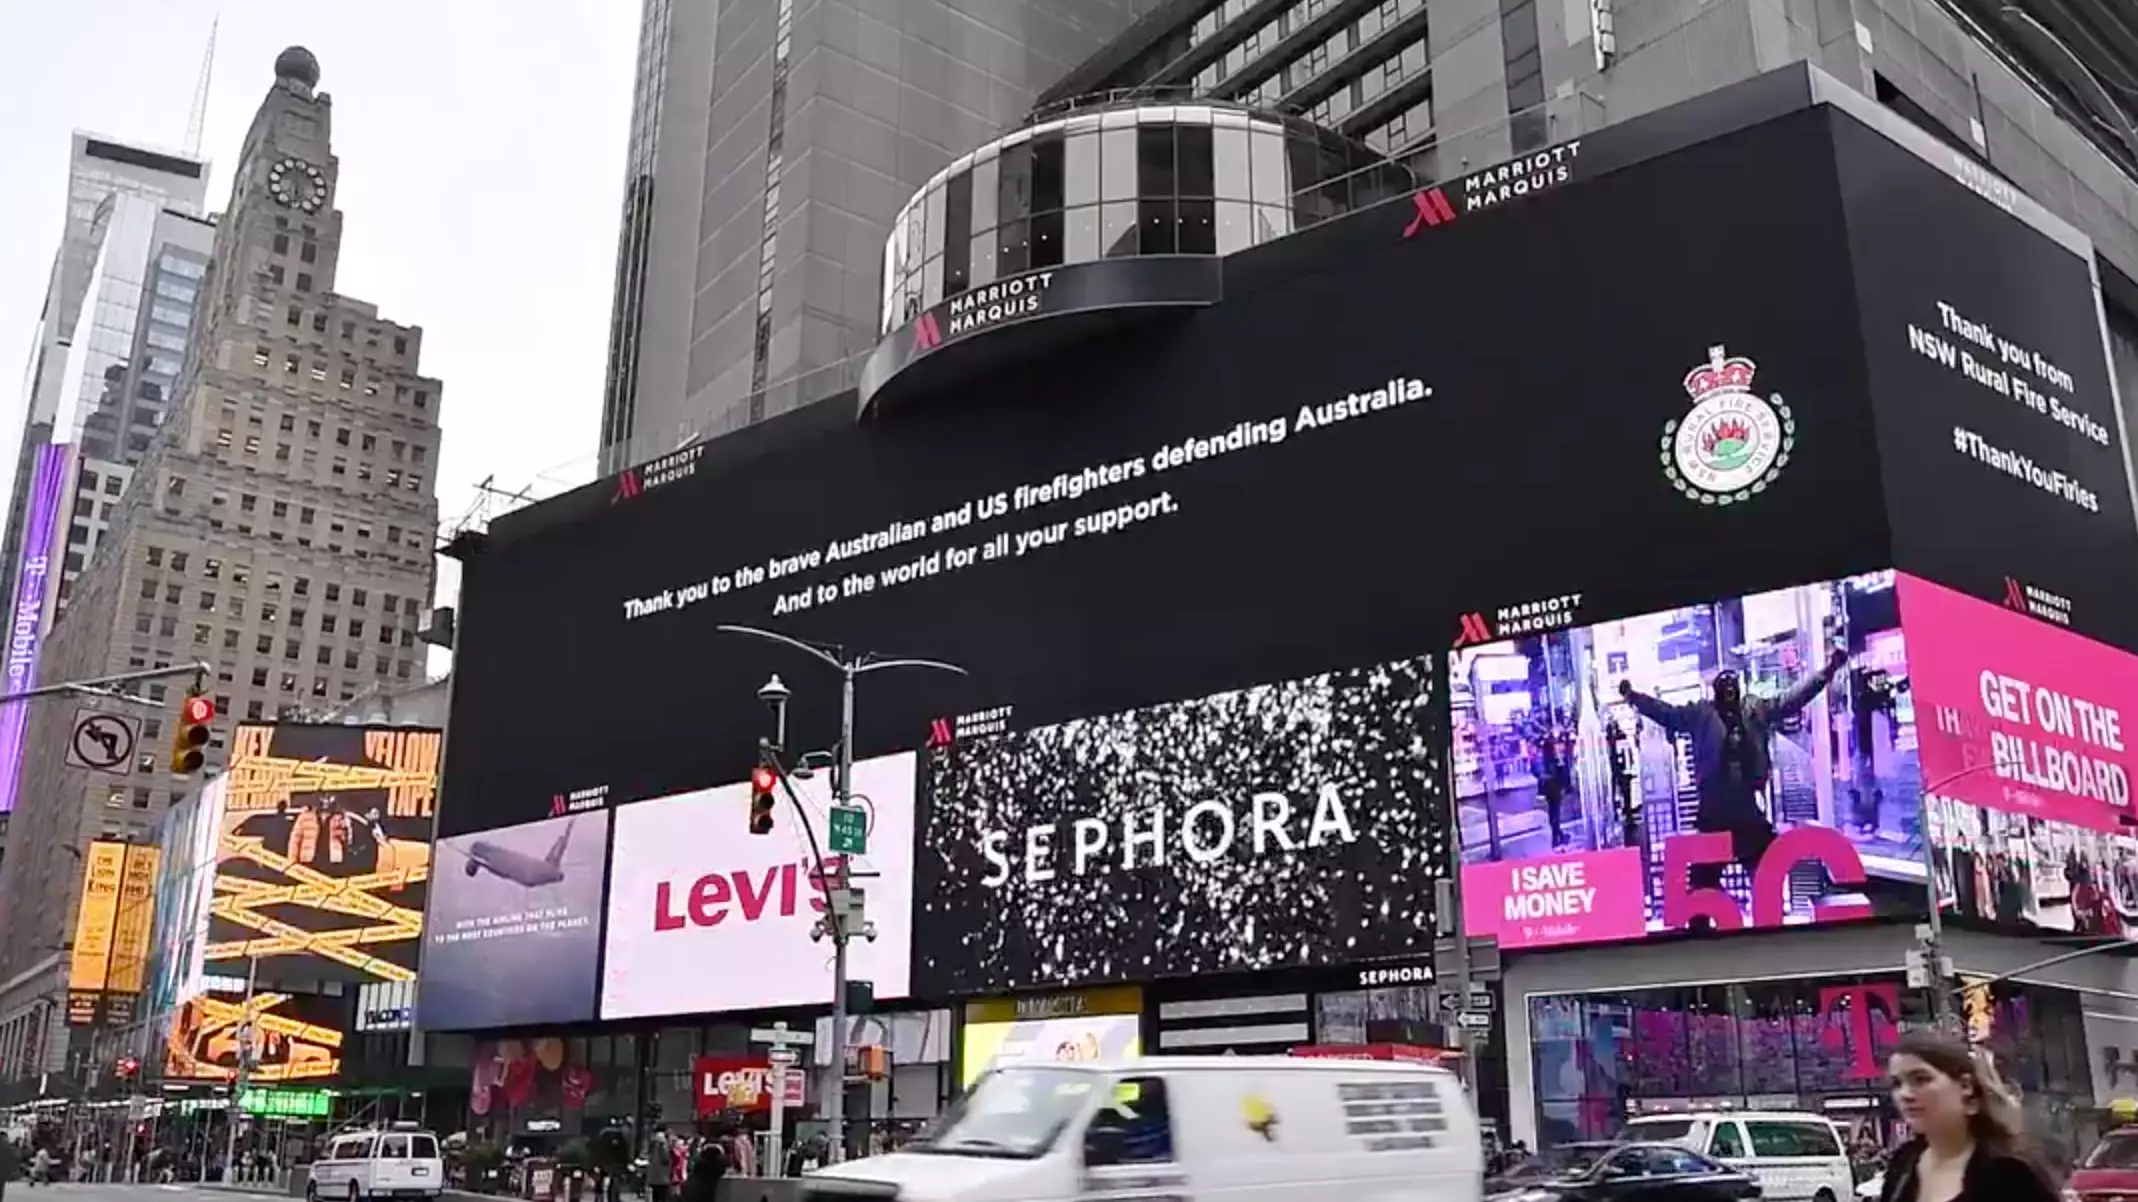 NSW RFS Takes Out Massive Billboard In Time's Square To Thank US Firefighters